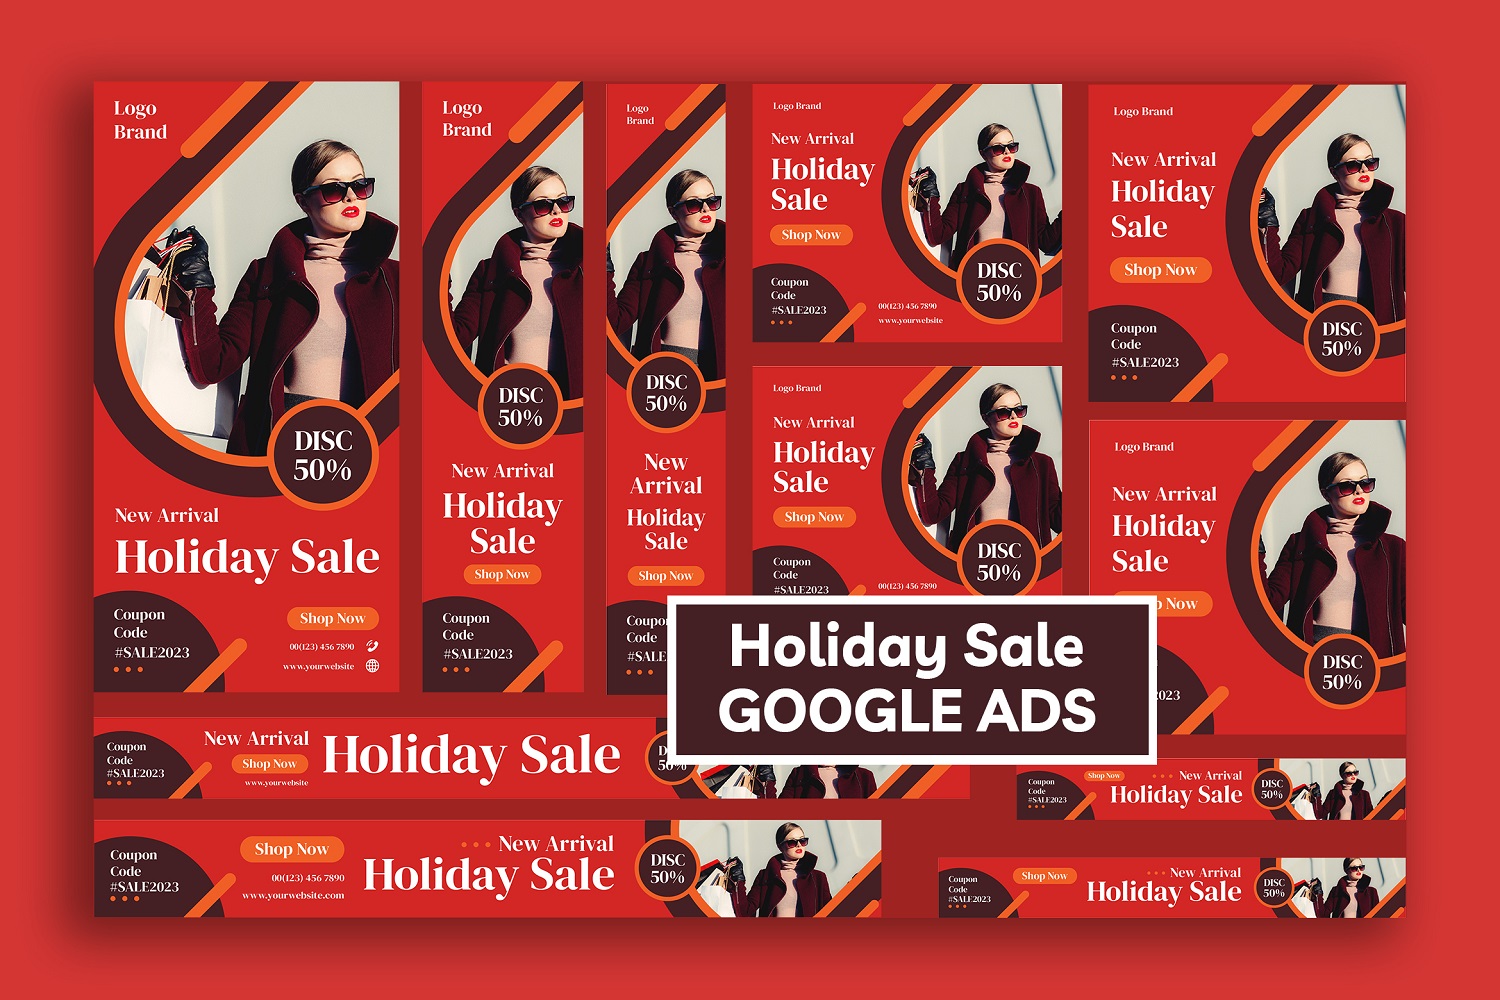 Holiday Sale Google Ads Template